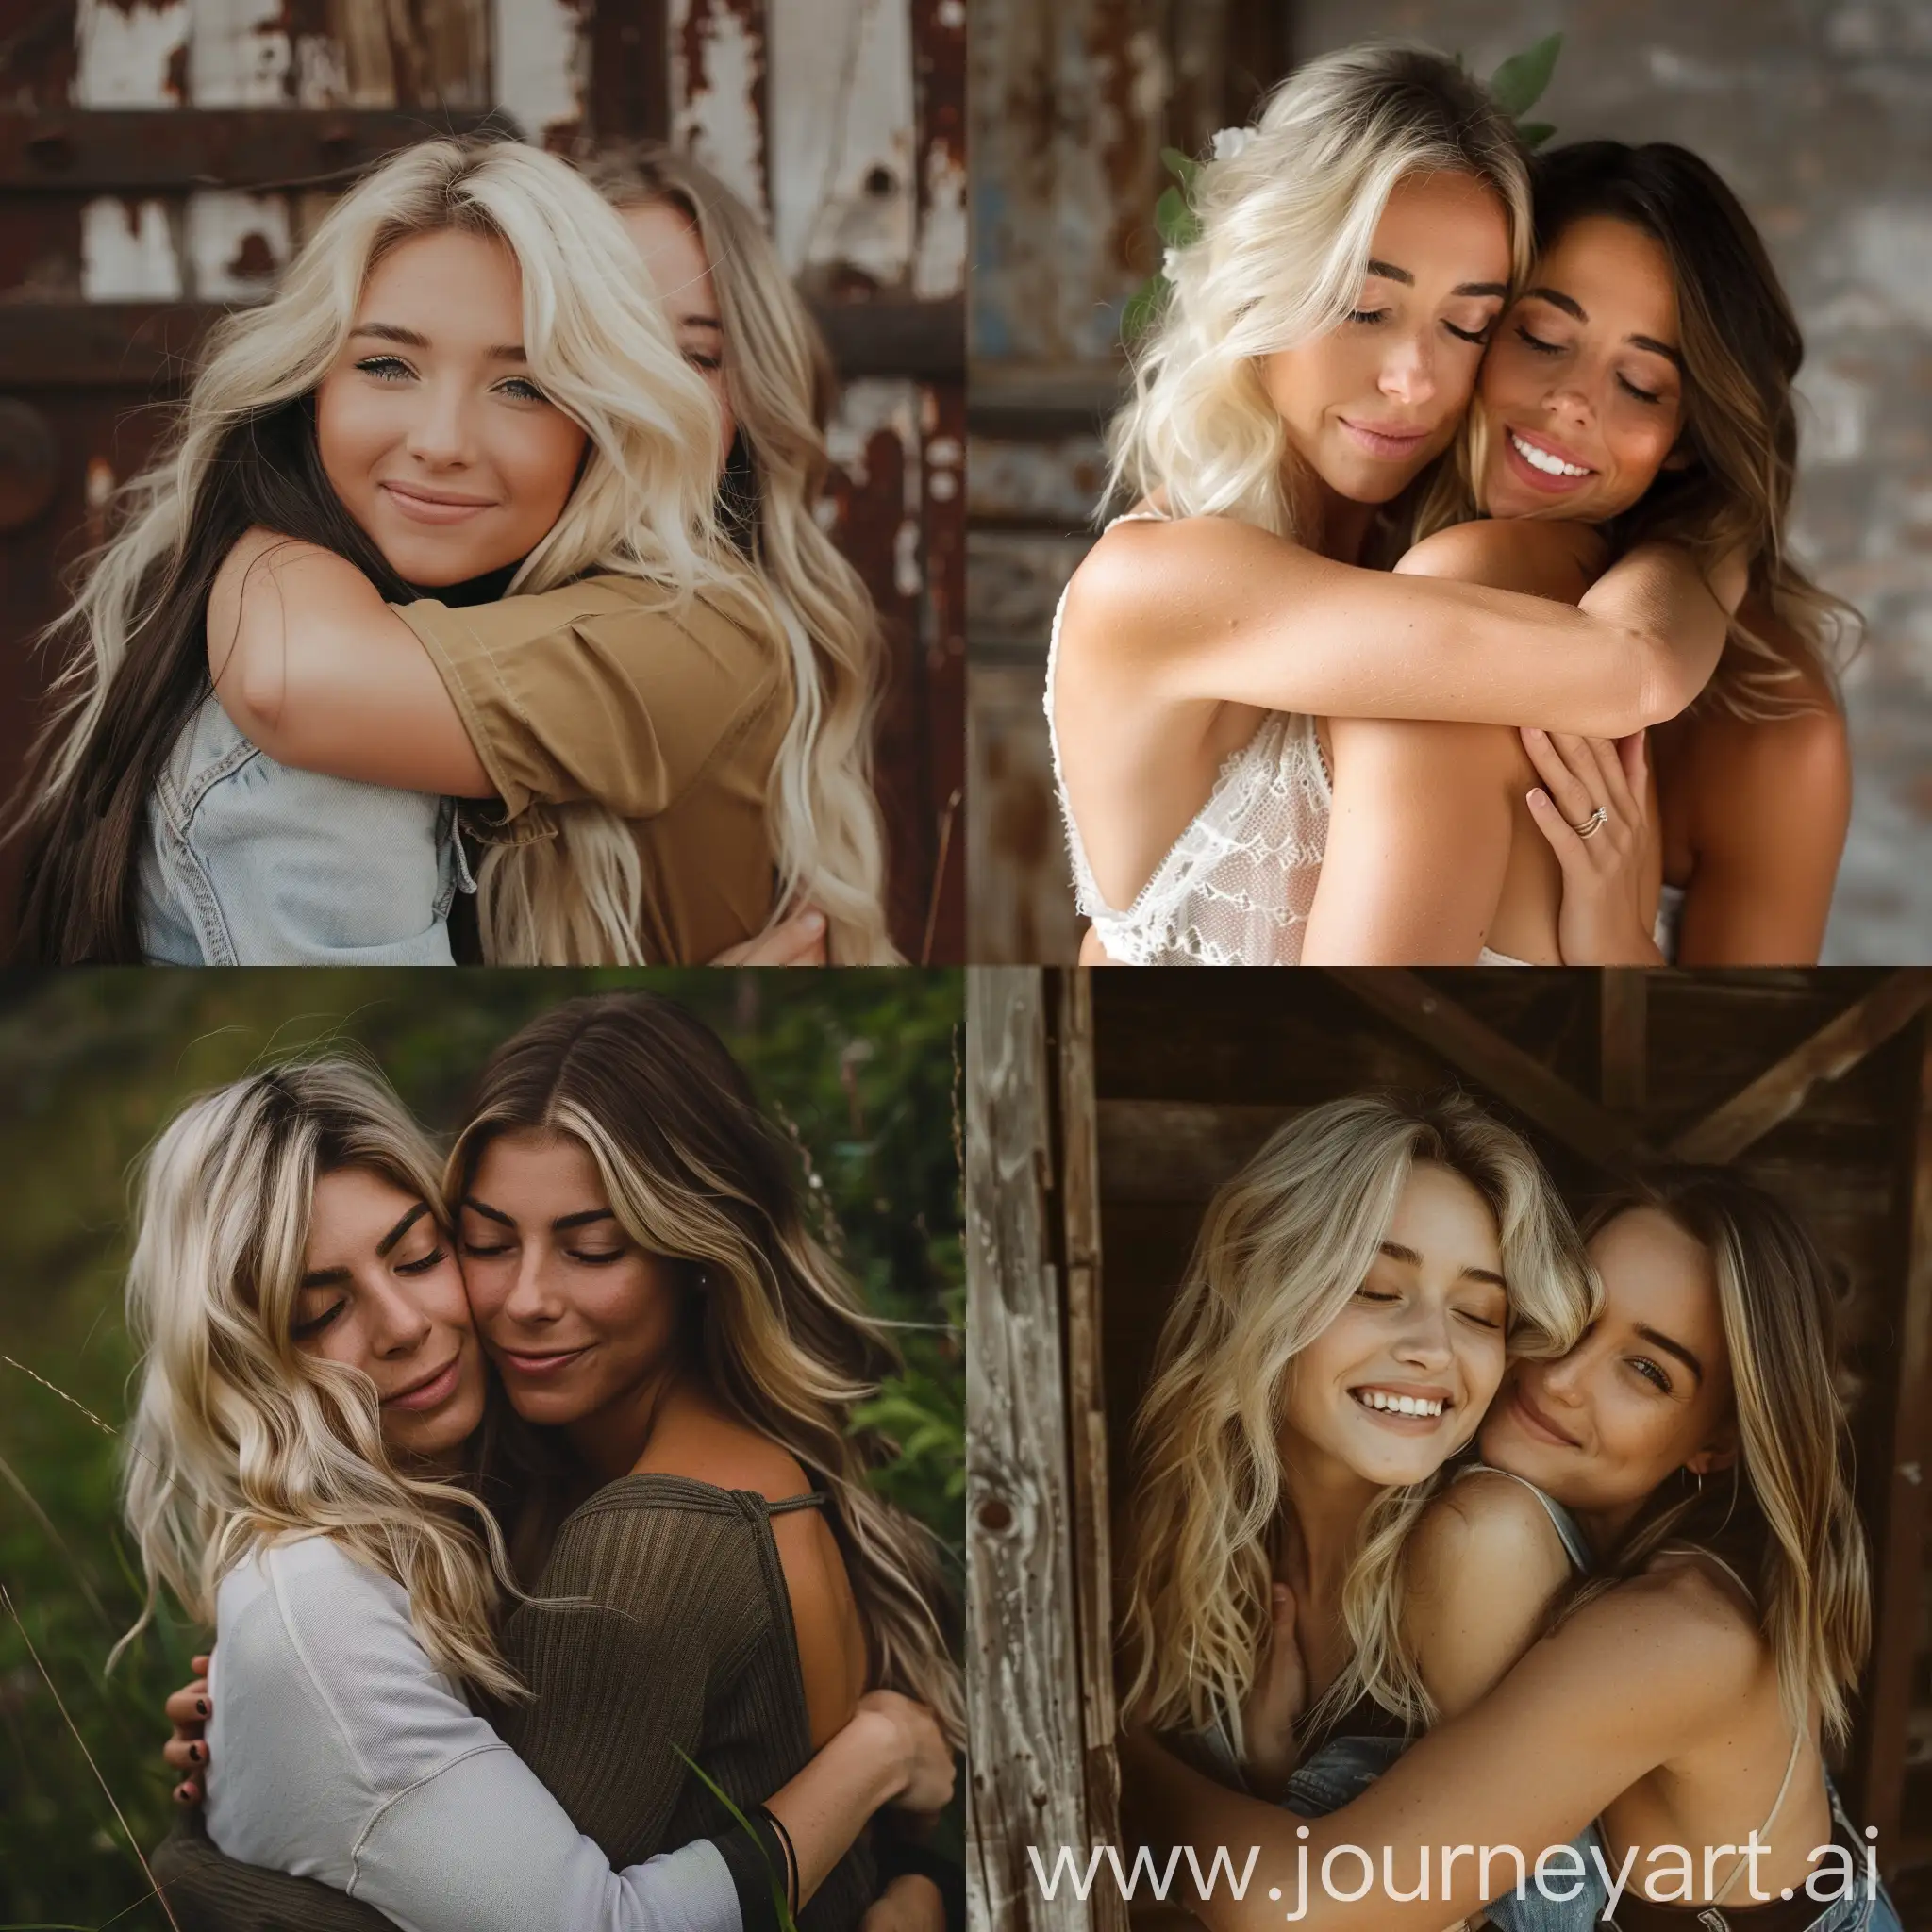 Beautiful blonde woman being hugged from behind by a brunette woman